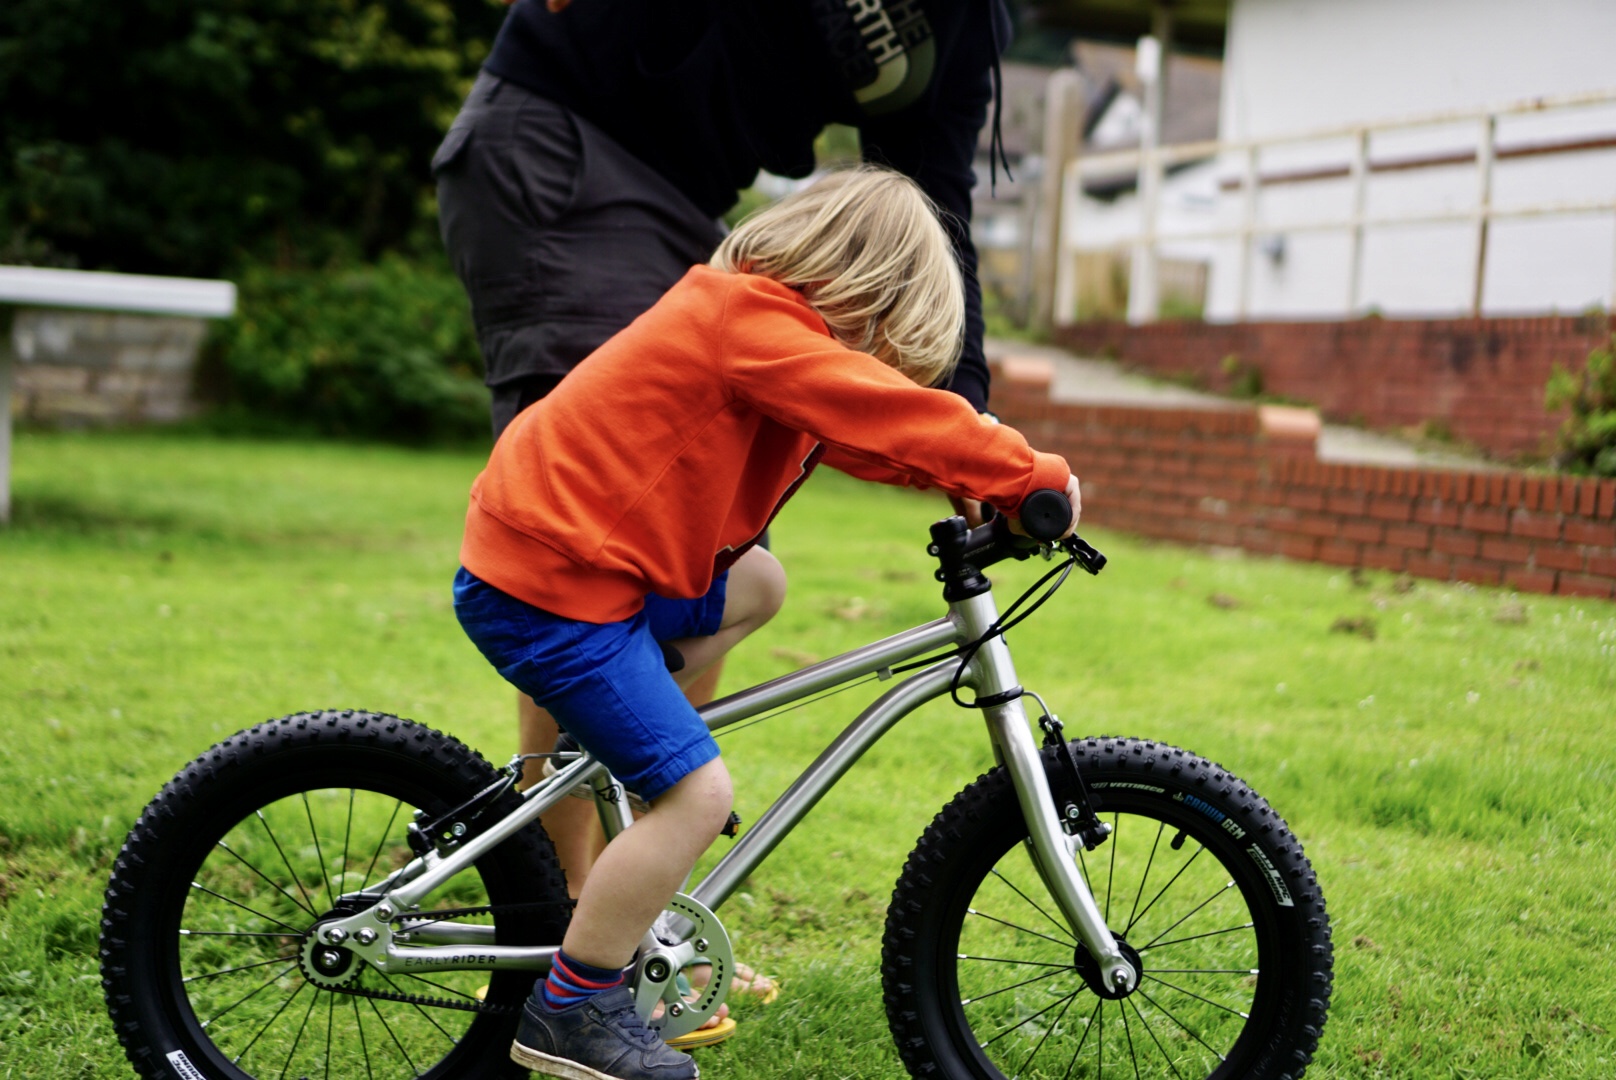 4 Tips to help you teach your child how to ride a bike